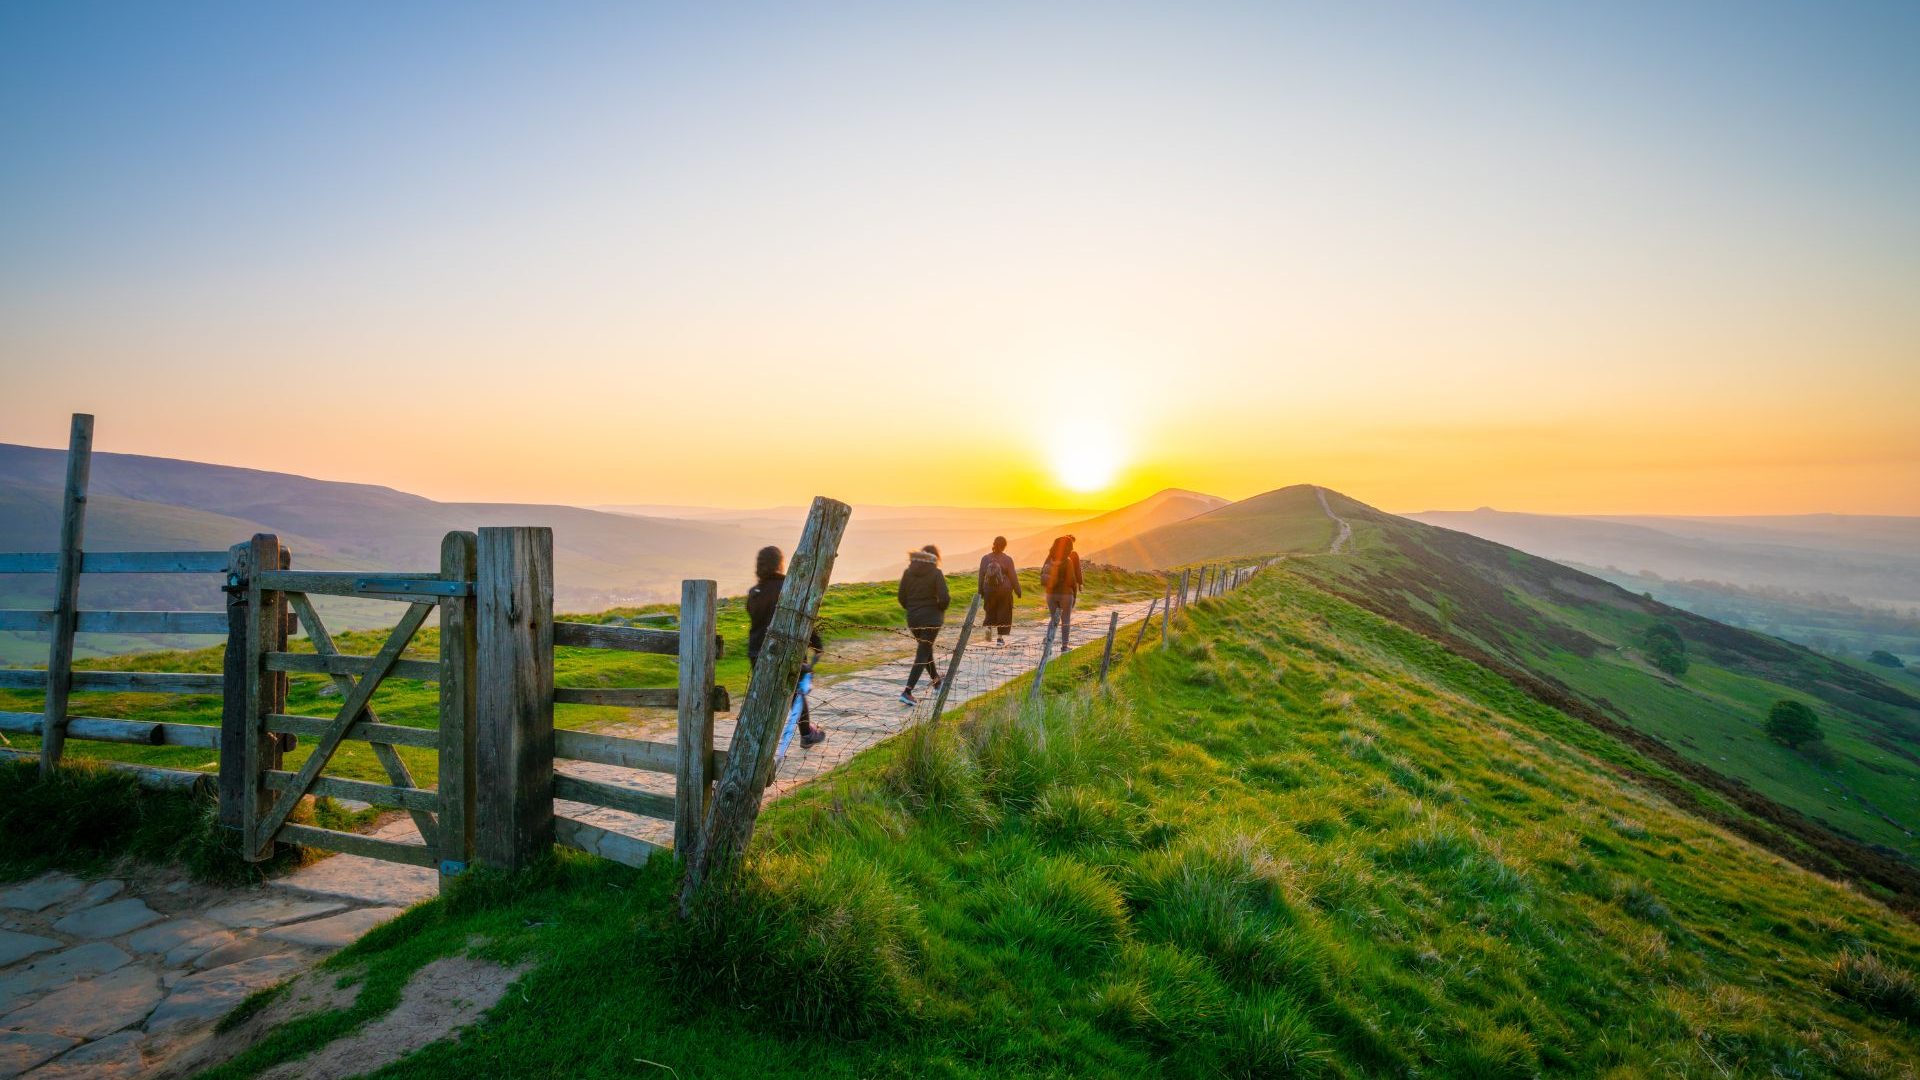 People walking at sunrise over the Great Ridge At Mam Tor Hill In The Peak District